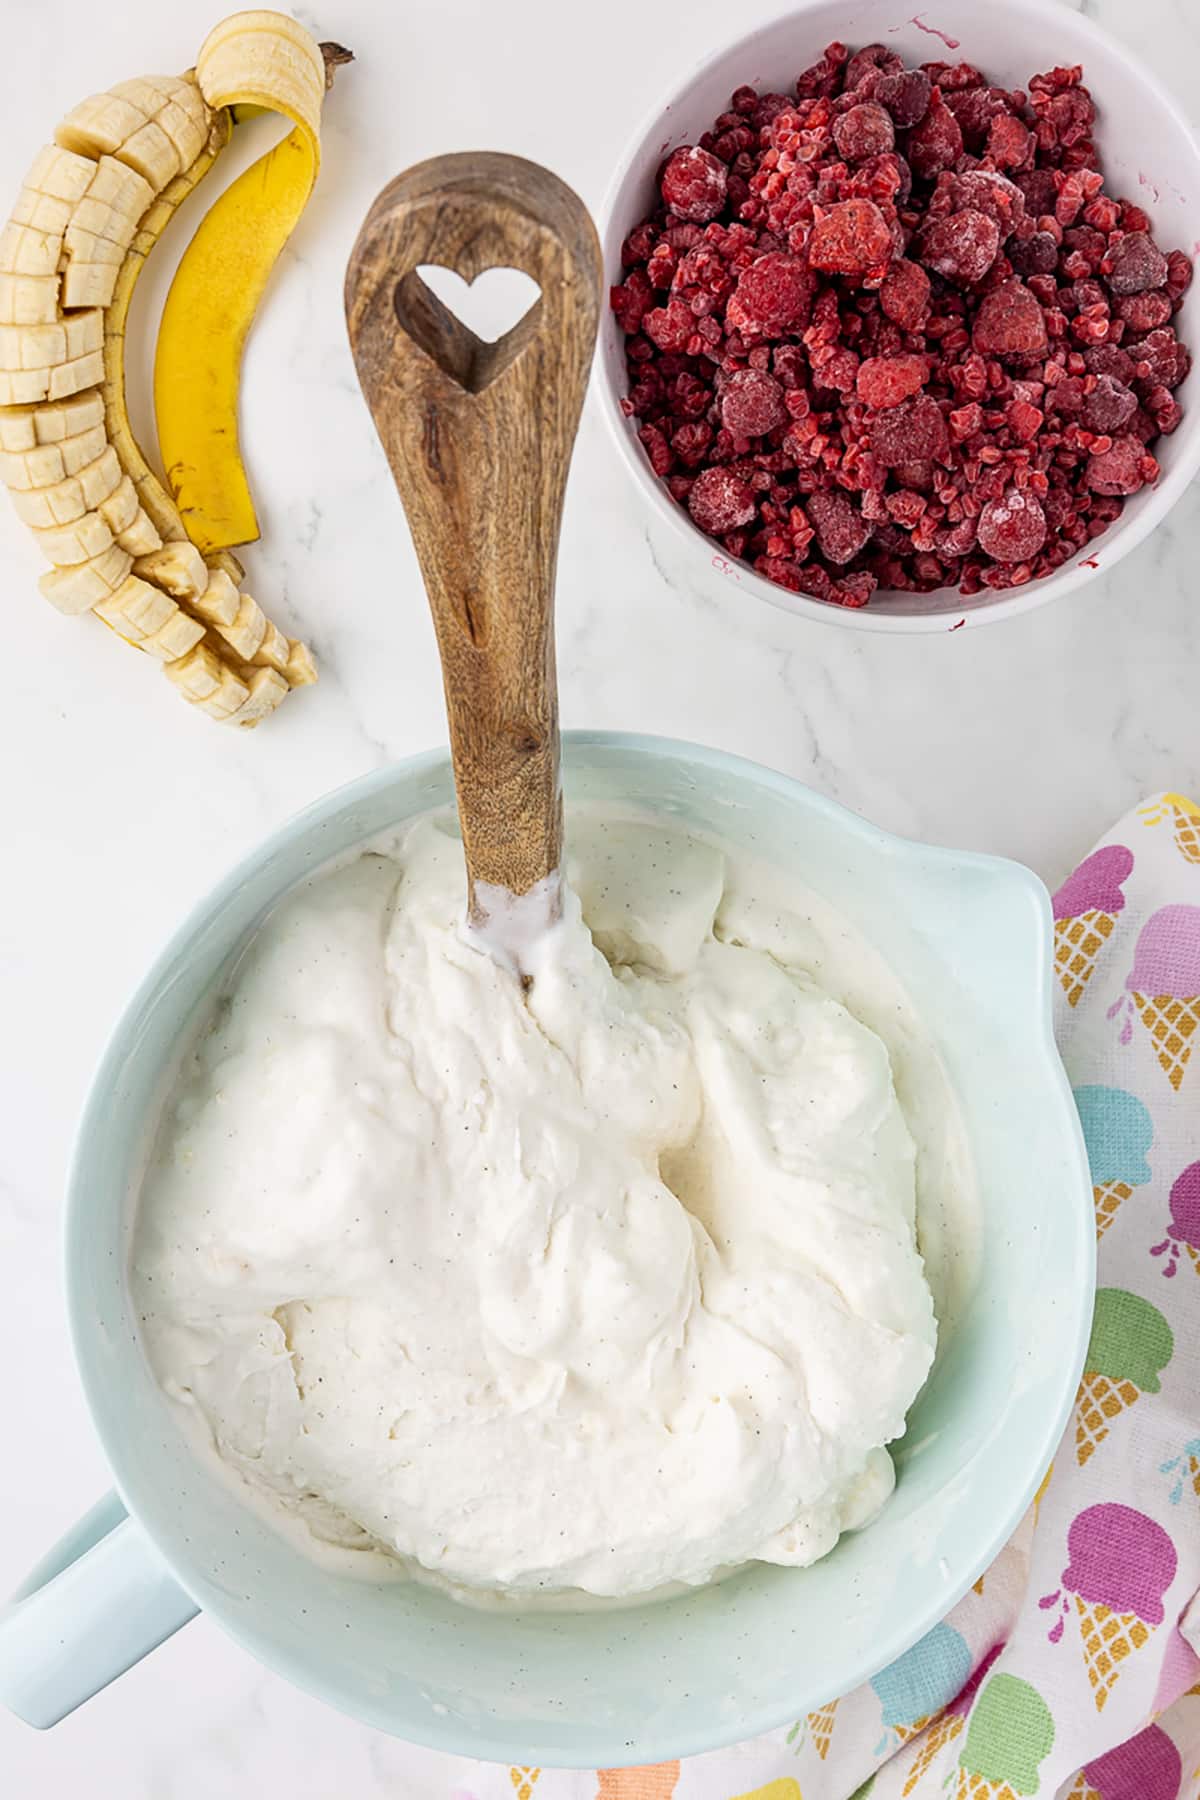 Large mixing bowl/cup with vanilla ice cream and wooden spoon in it, surrounded by whole banana cut in pieces, and a bowl of fresh raspberries